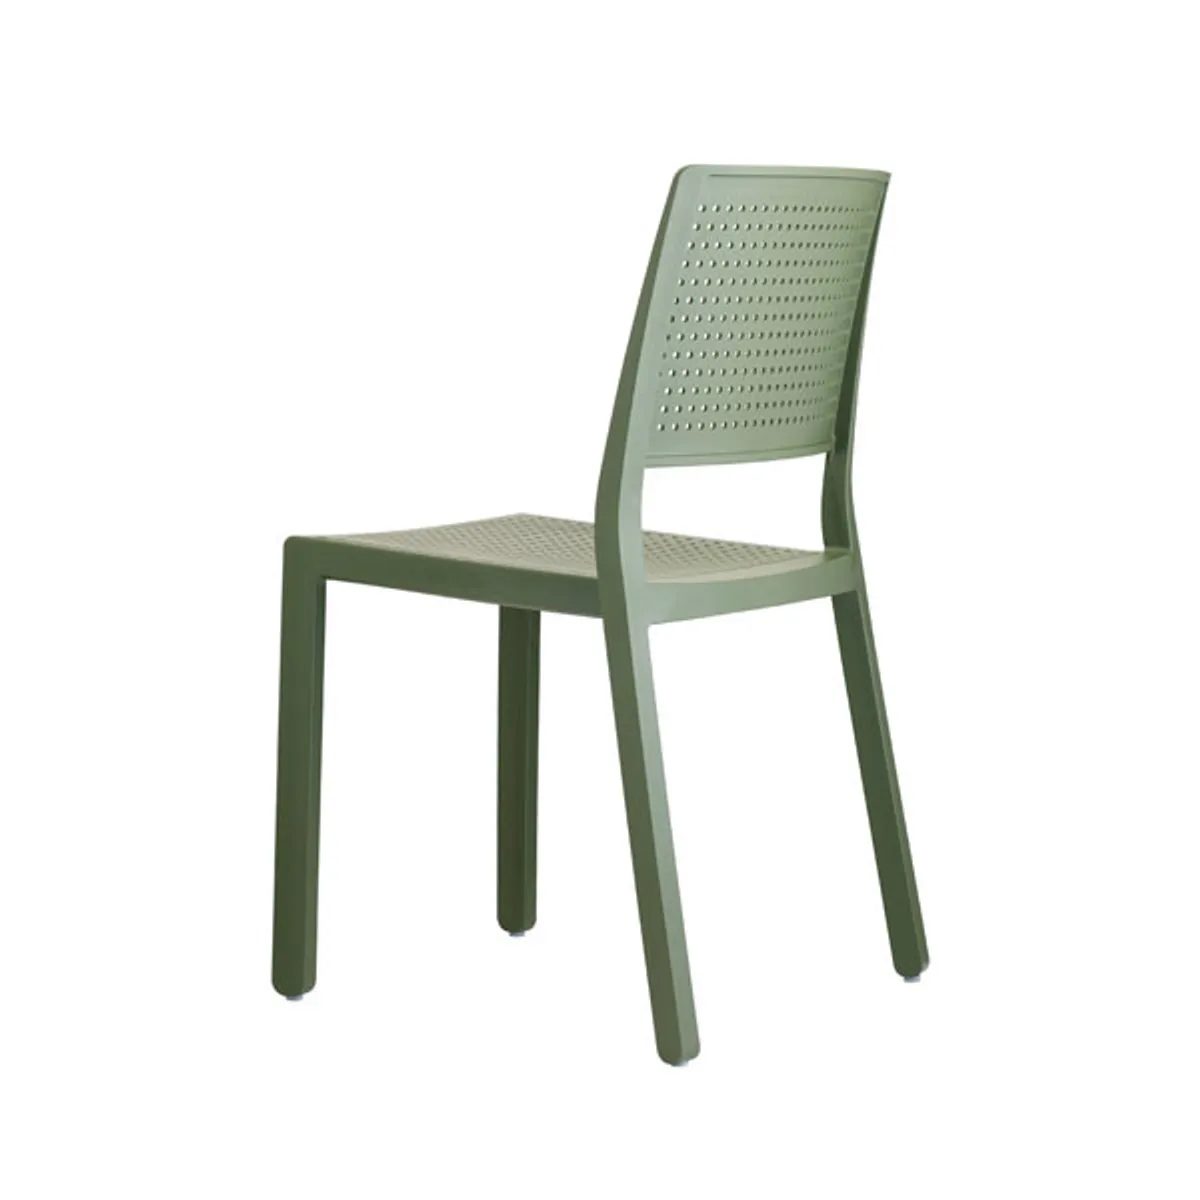 Remi dot side chair 9 Inside Out Contracts